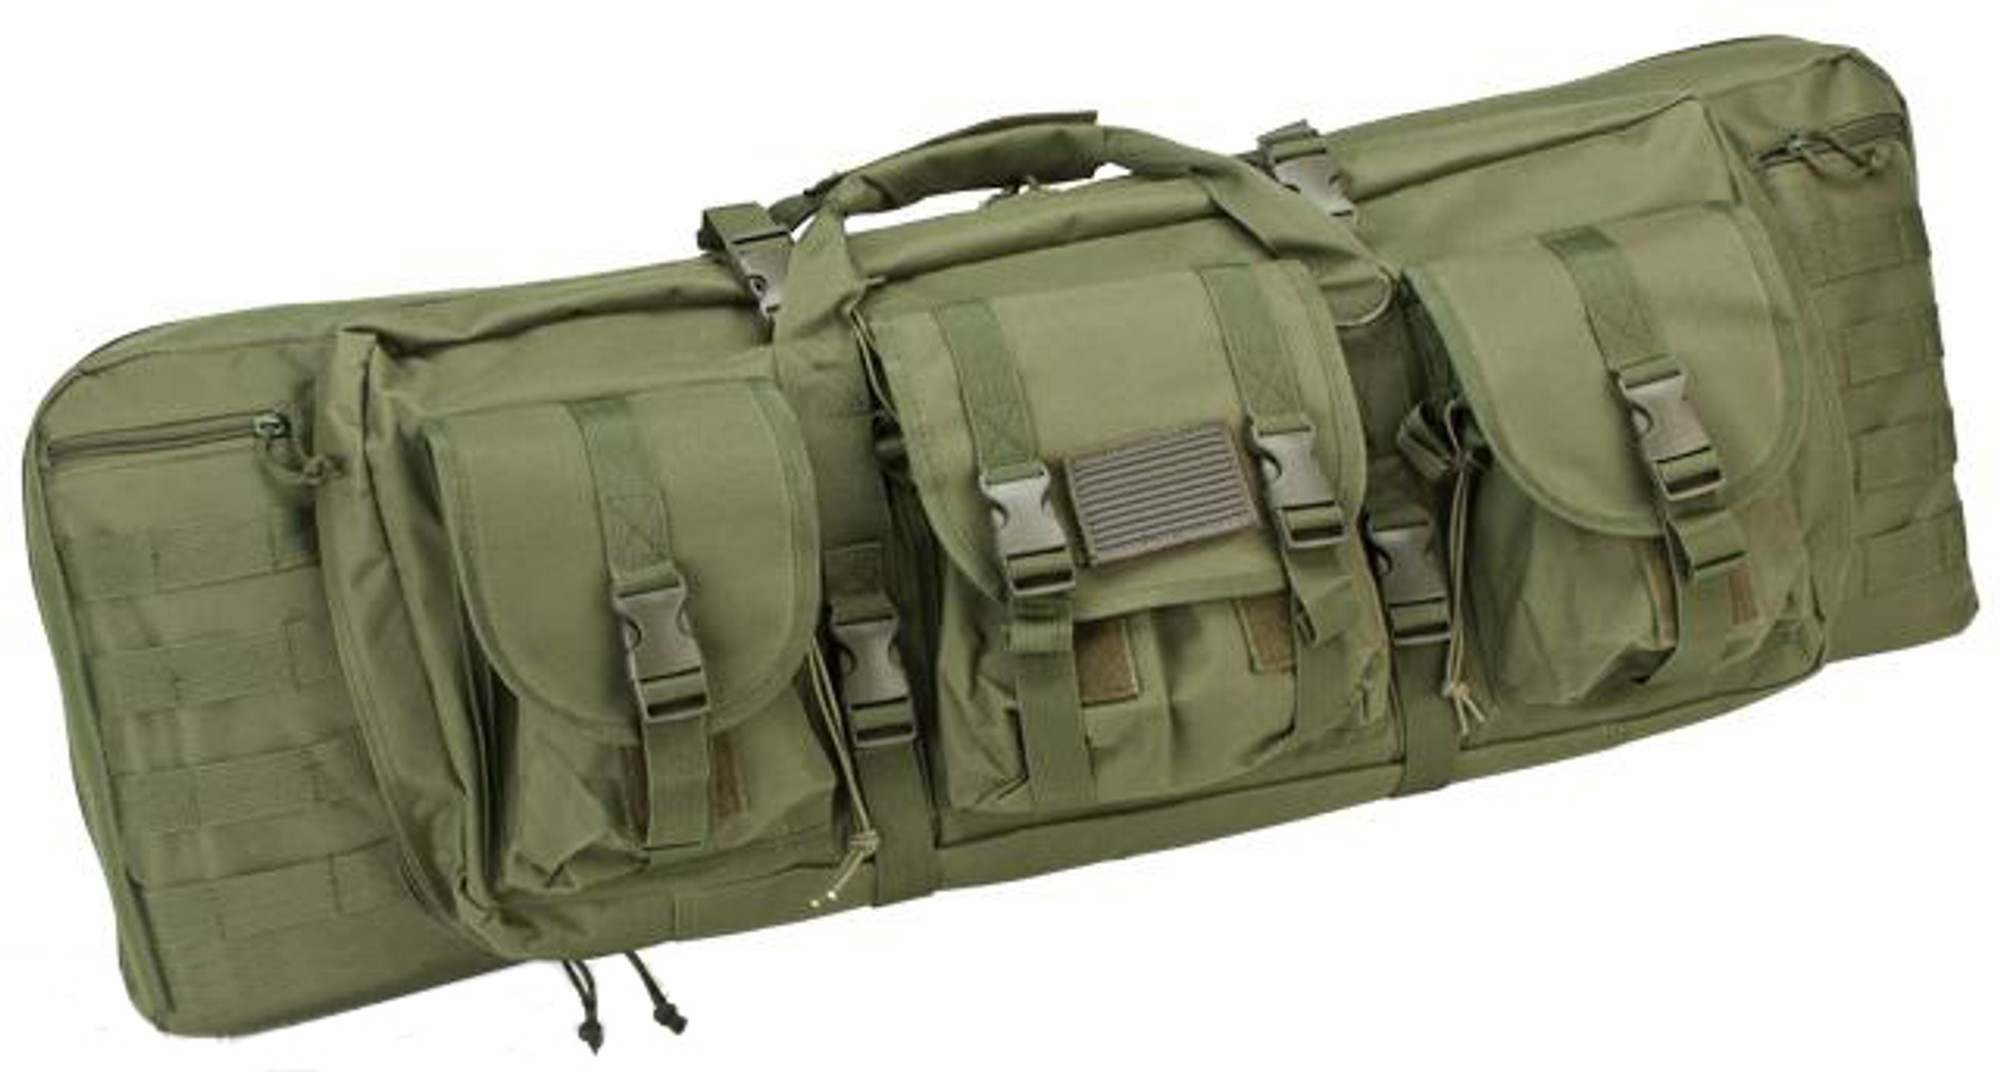 Combat Featured 36" Ultimate Dual Weapon Case Rifle Bag (OD Green)